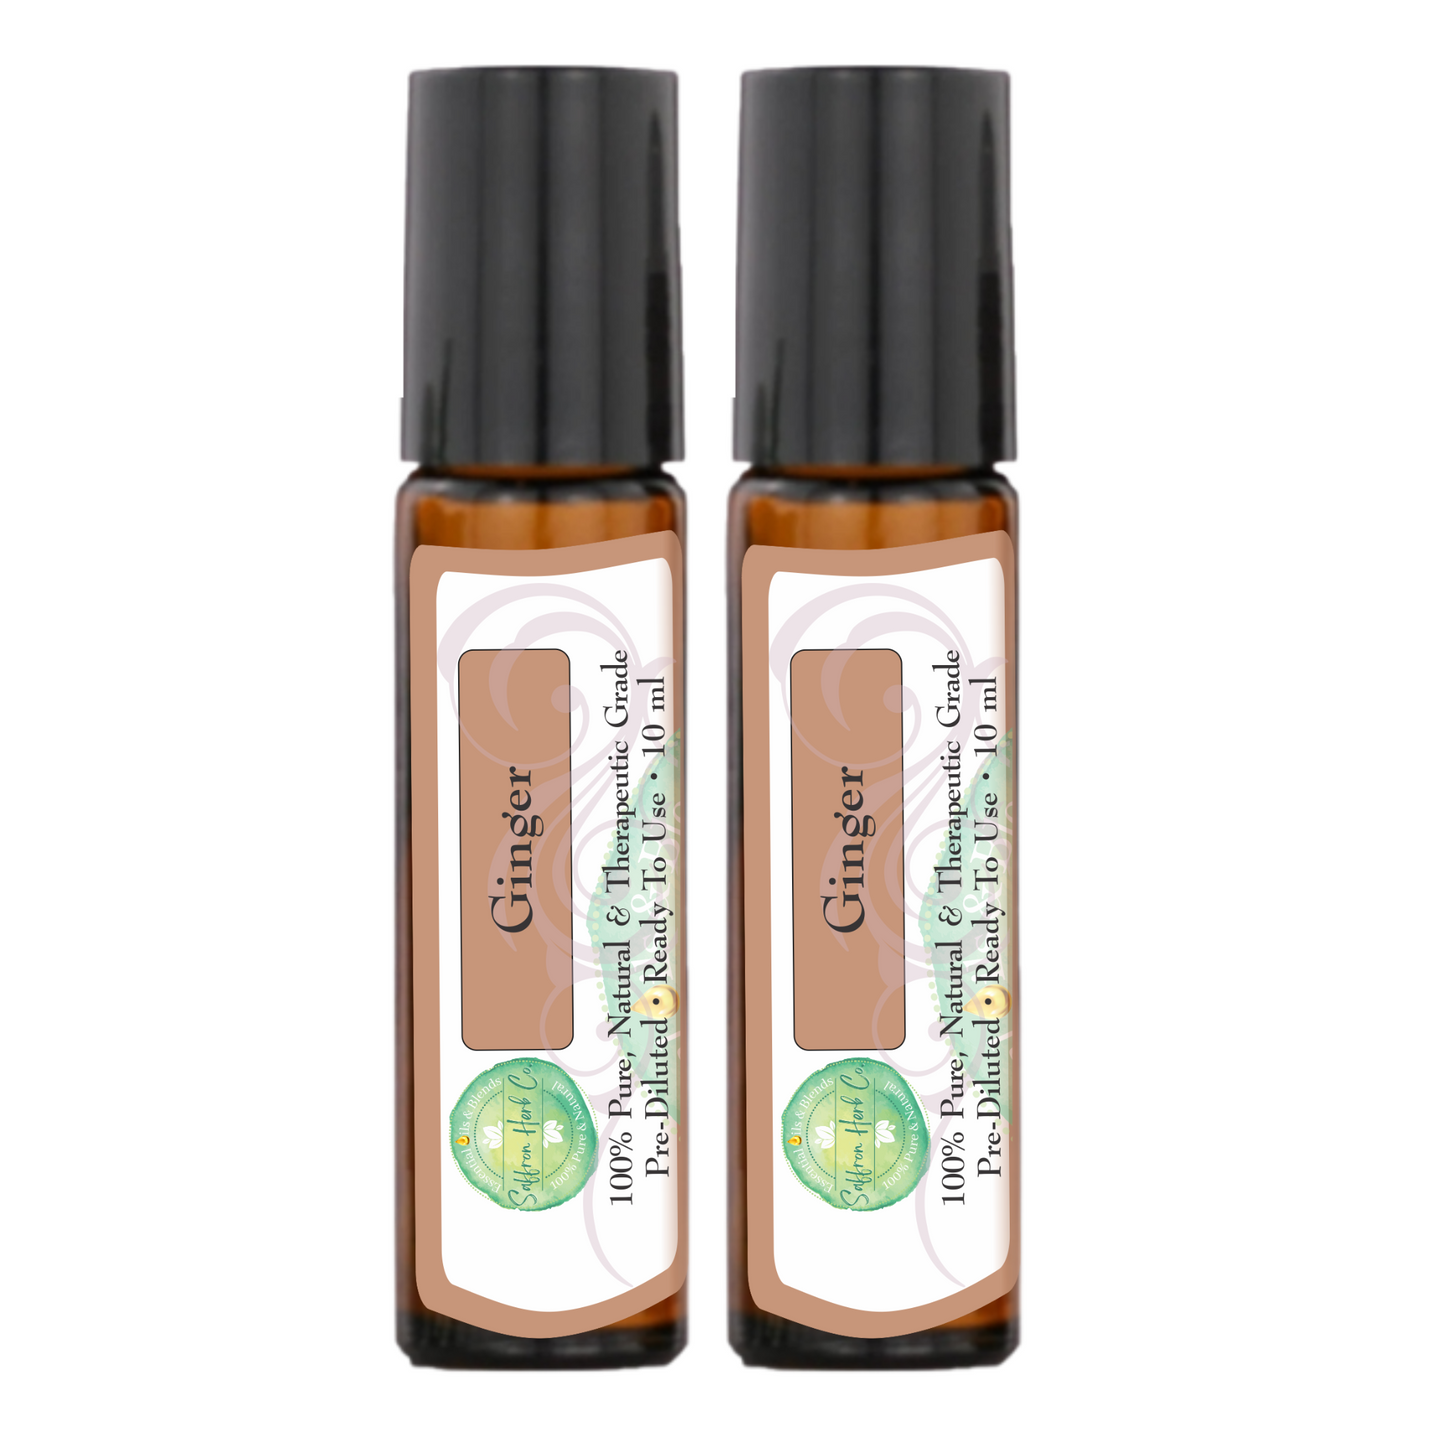 Ginger Essential Oil Roller Bottle Blend • 100% Pure & Natural • Pre-Diluted • Ready To Use